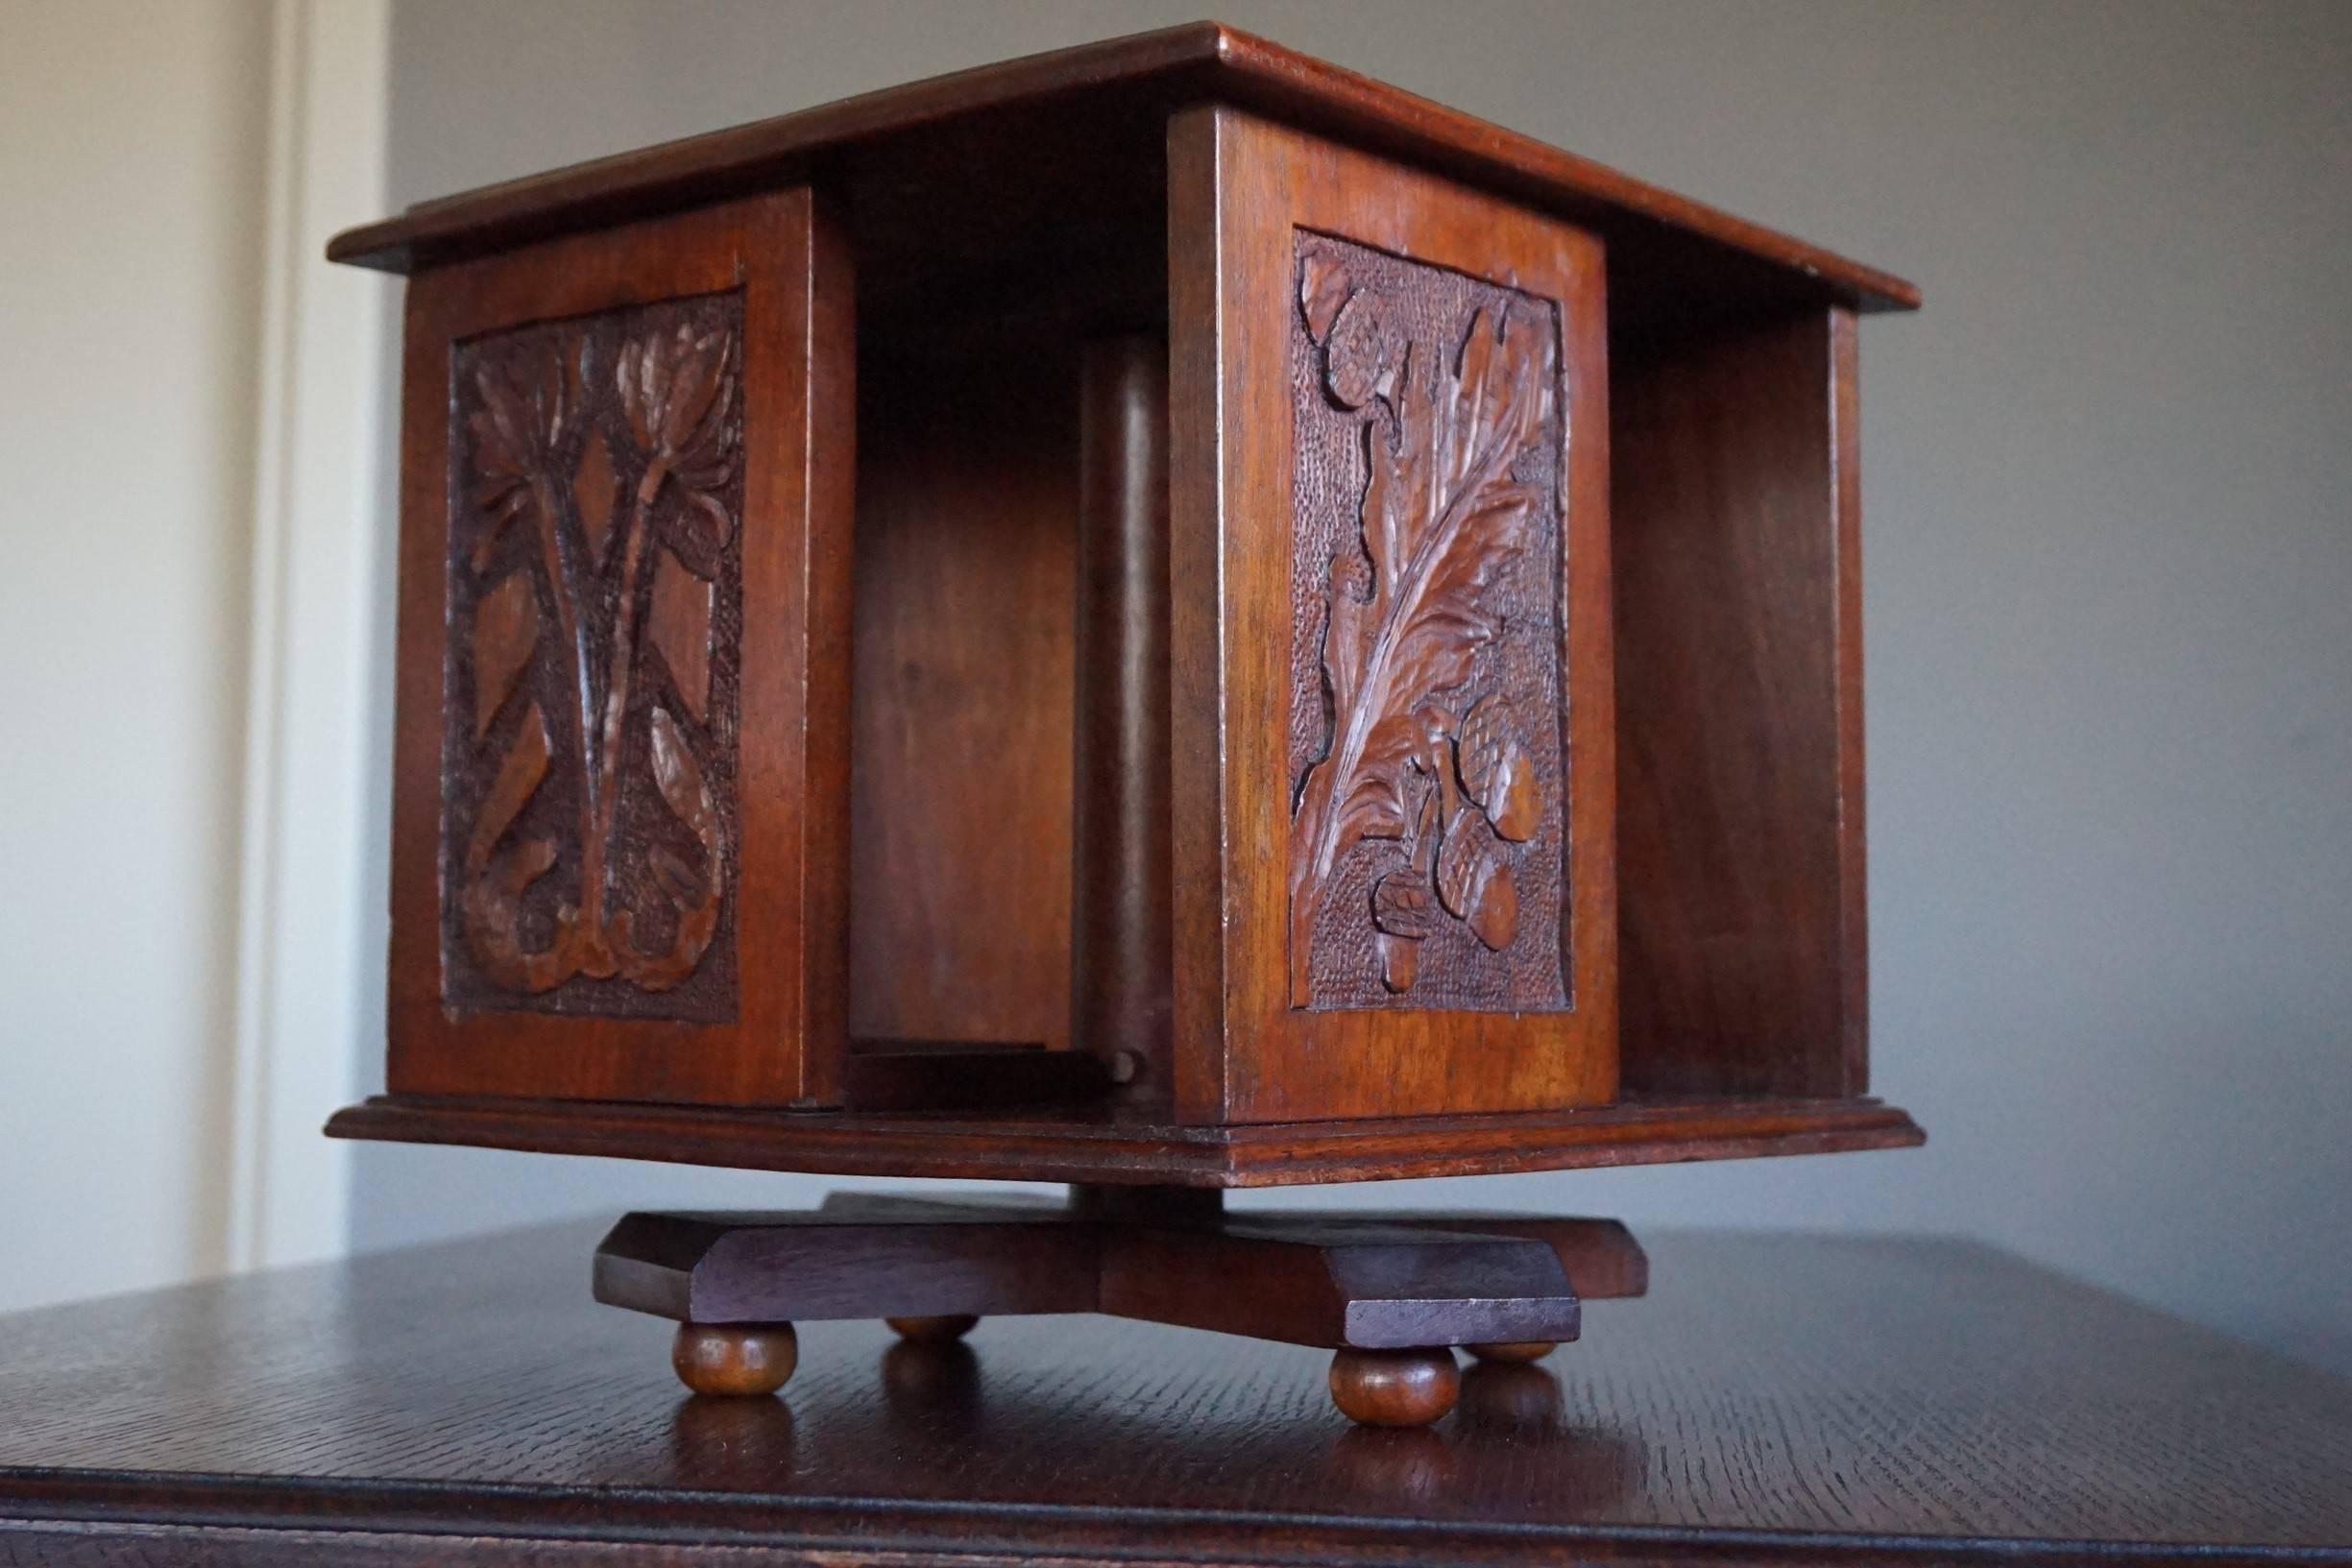 Mahogany Hand-Carved Arts and Crafts Revolving Bookcase for Placing on a Table or Desk